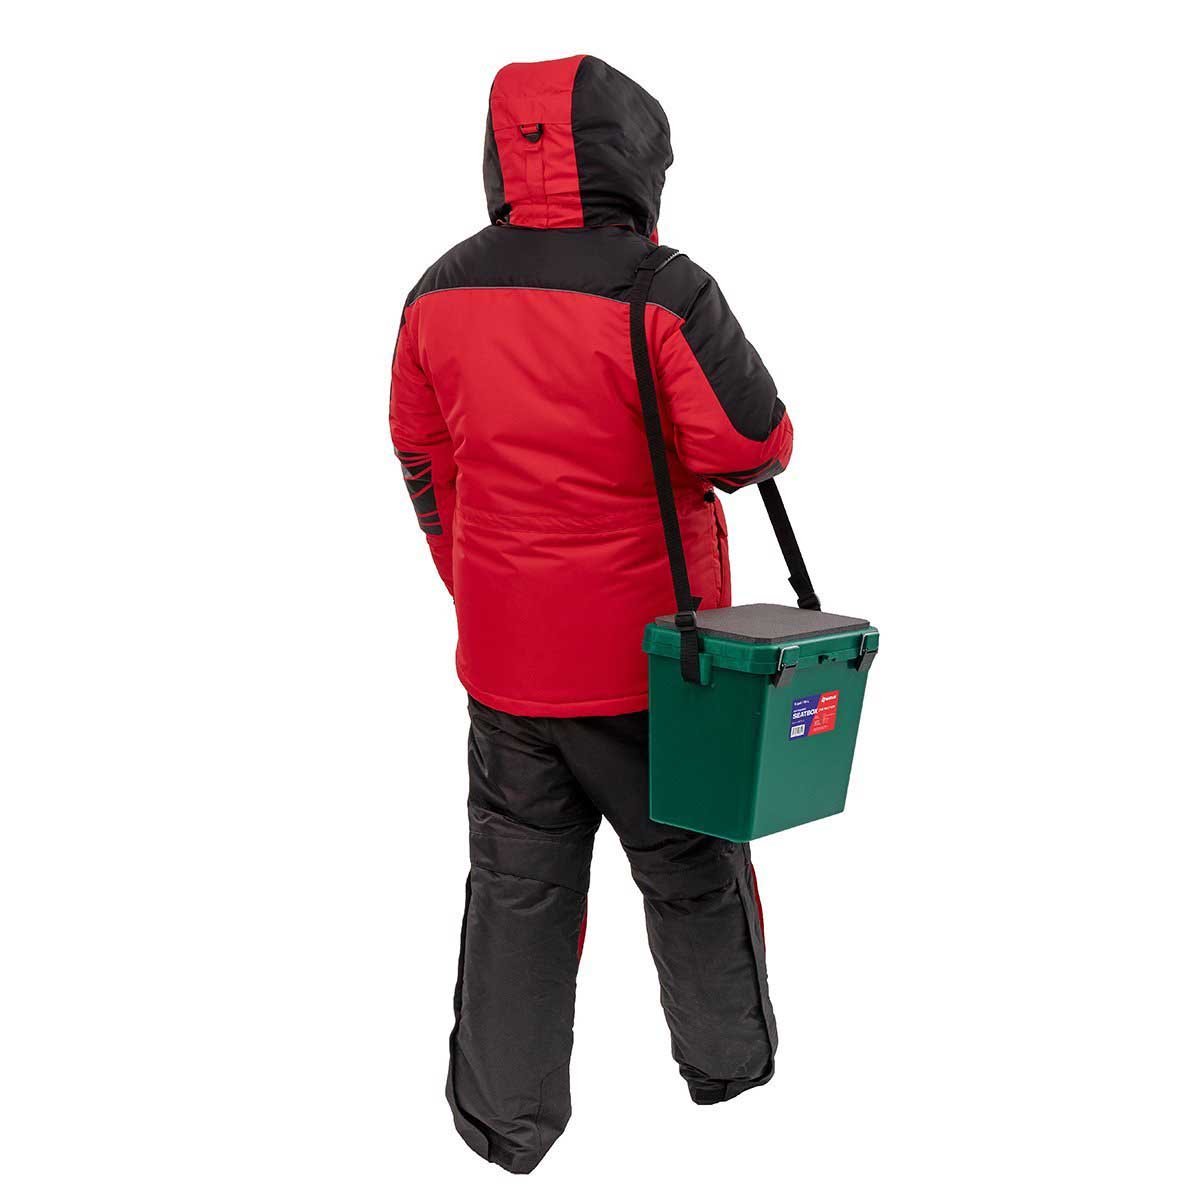 An angler carrying the Ice Fishing Bucket Type Box with Seat and Adjustable Shoulder Strap | 1 compartment | 5 gal | green color